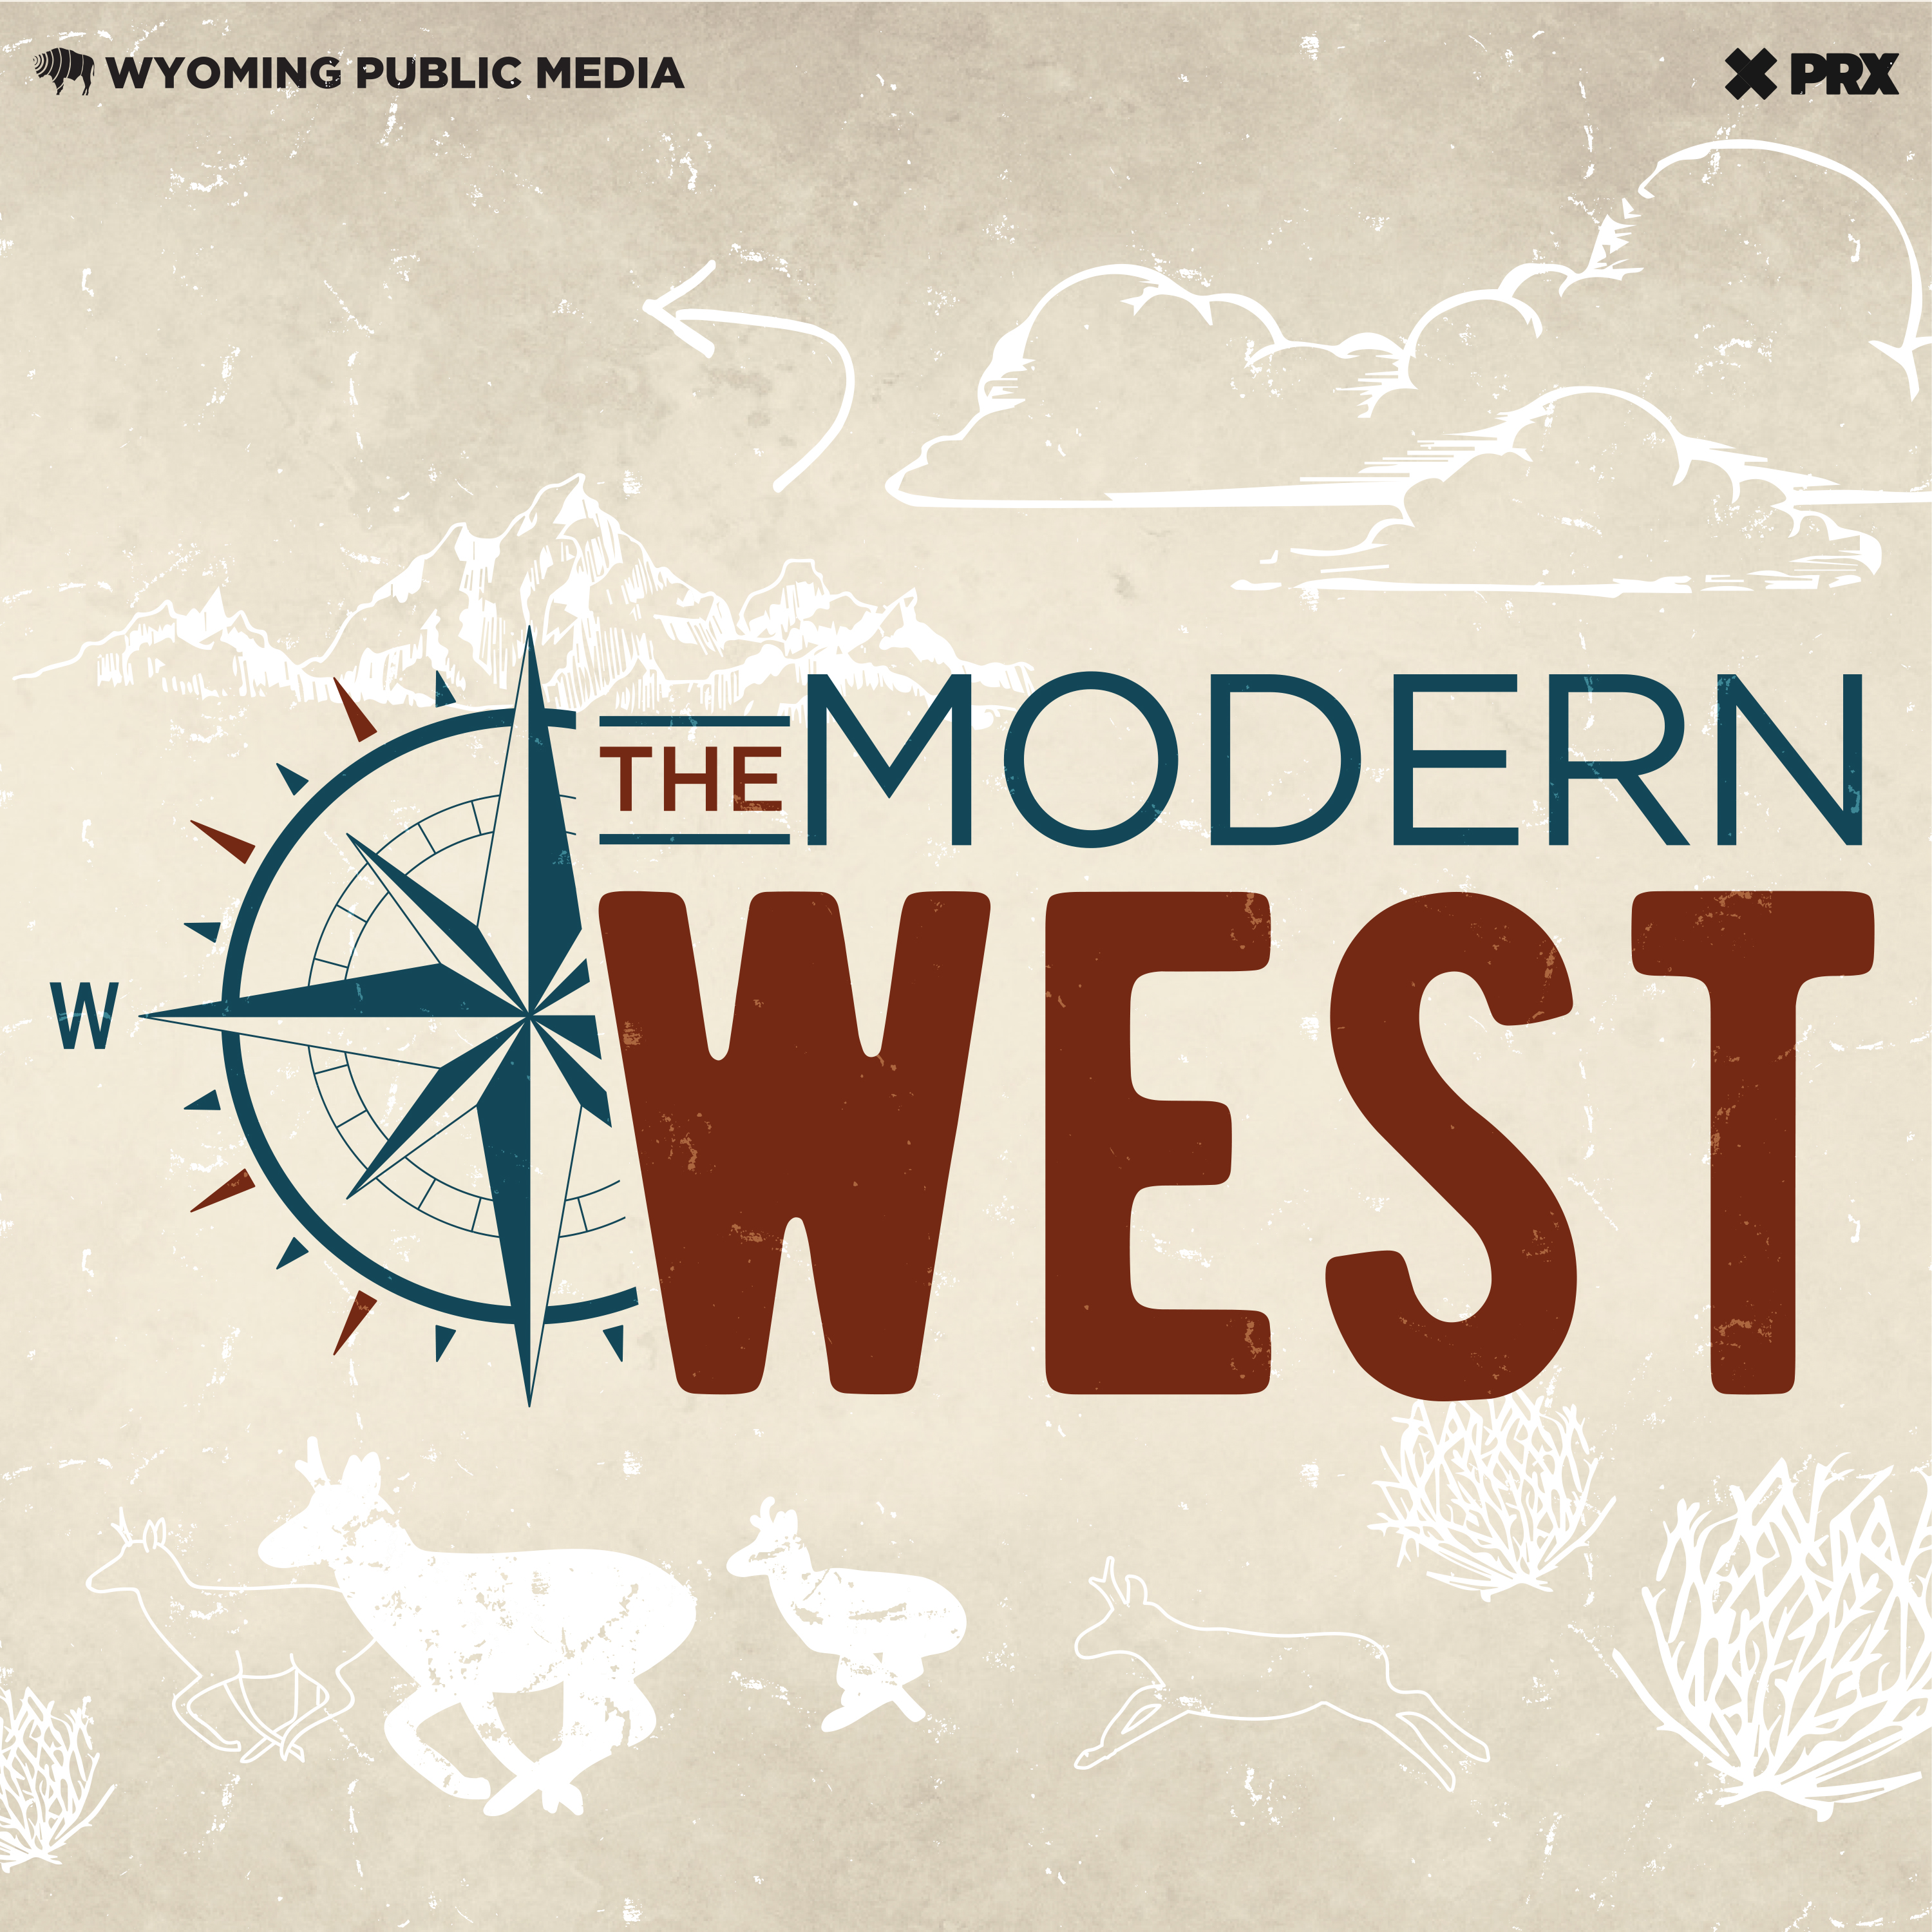 My Modern West: From Surviving To Thriving